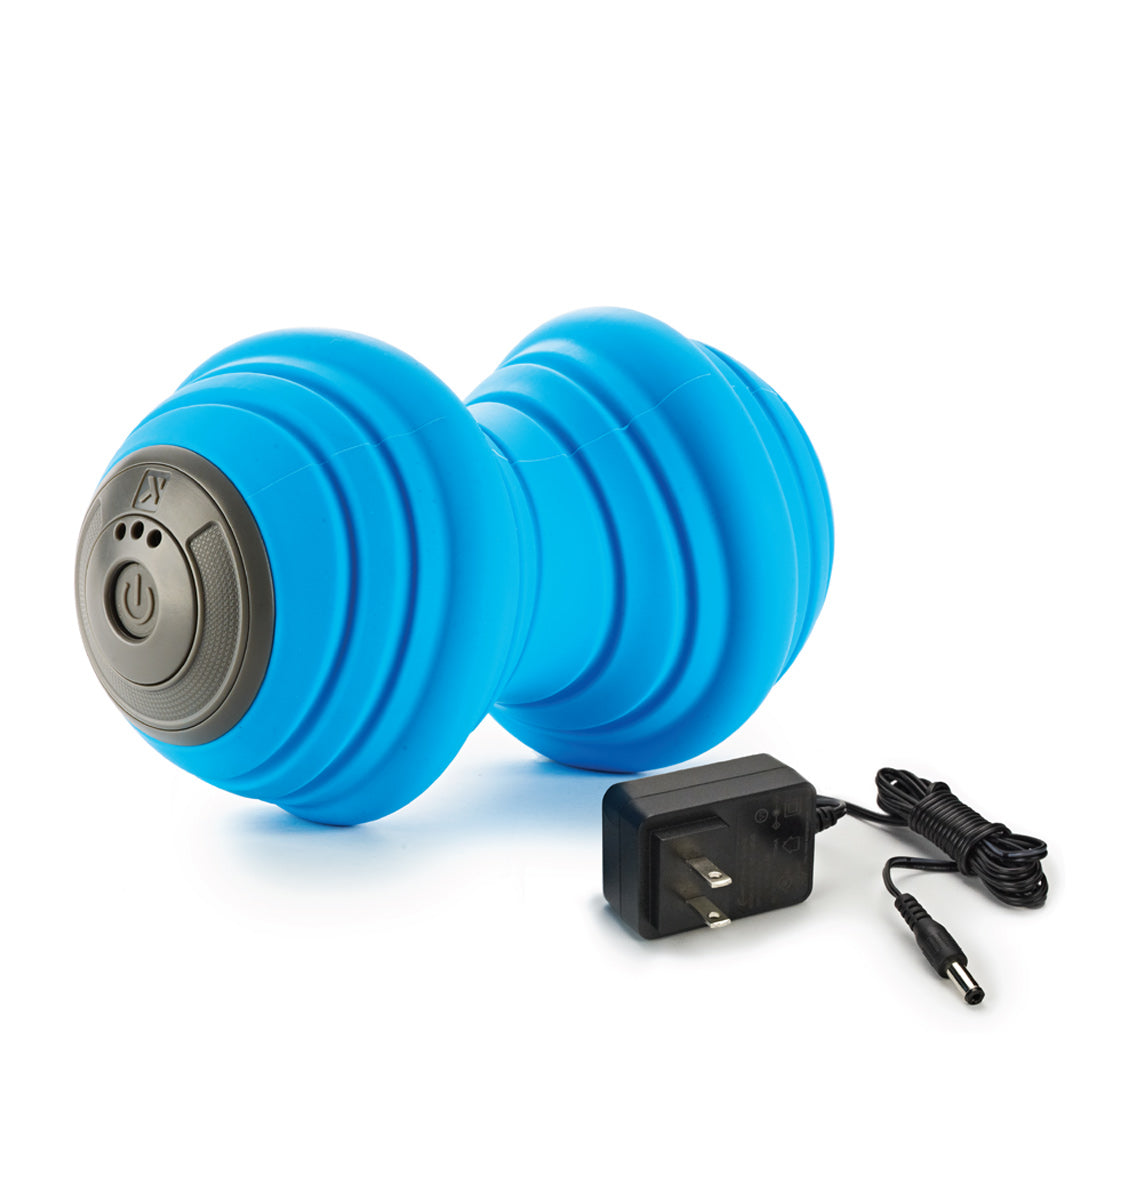 TriggerPoint Charge Vibe Vibrating Foam Roller - With Cables